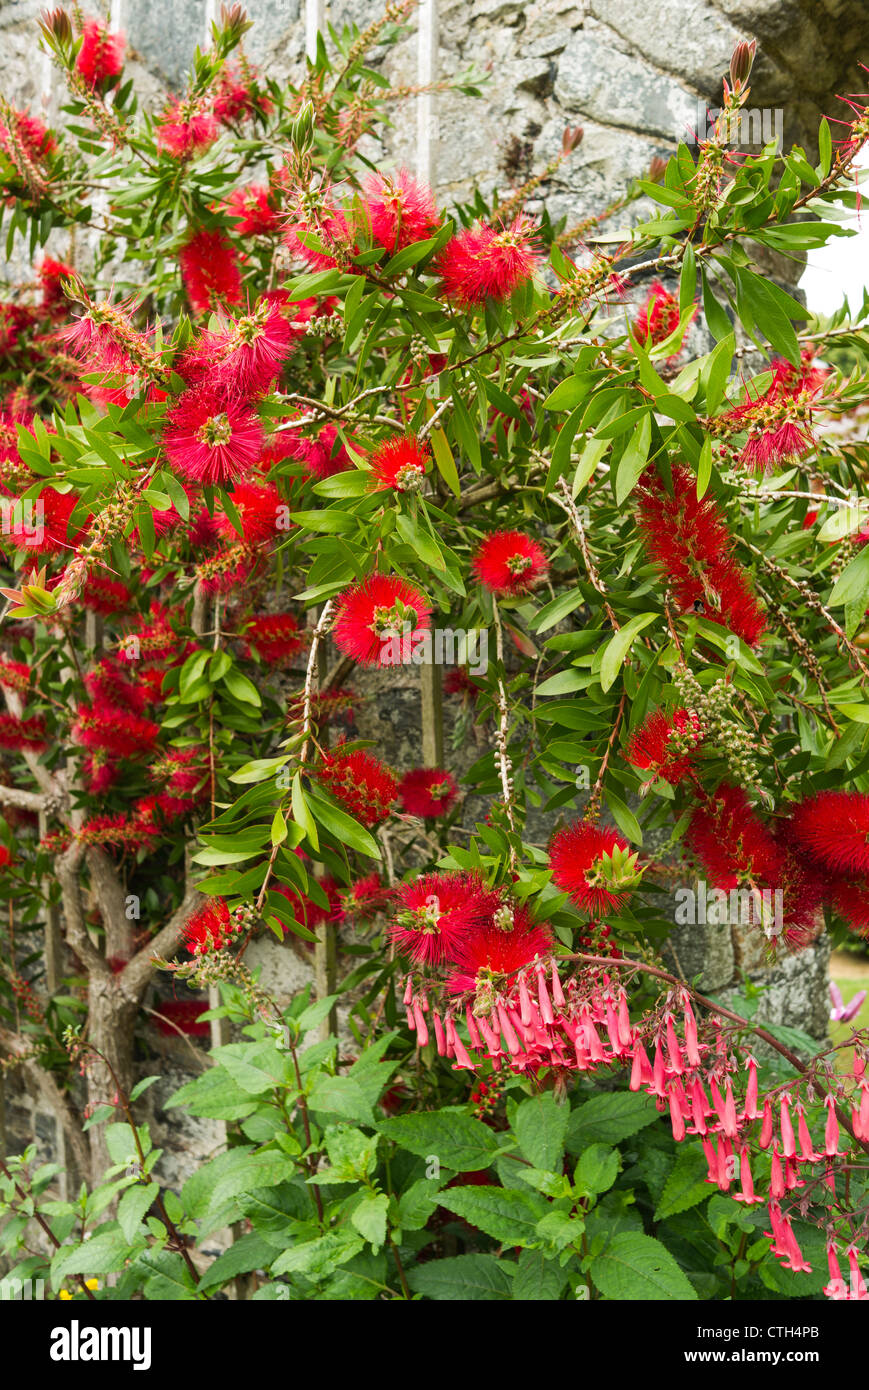 Callistemon or Bottle Brush growing with phygelius (Cape Fuchsia) in June Stock Photo